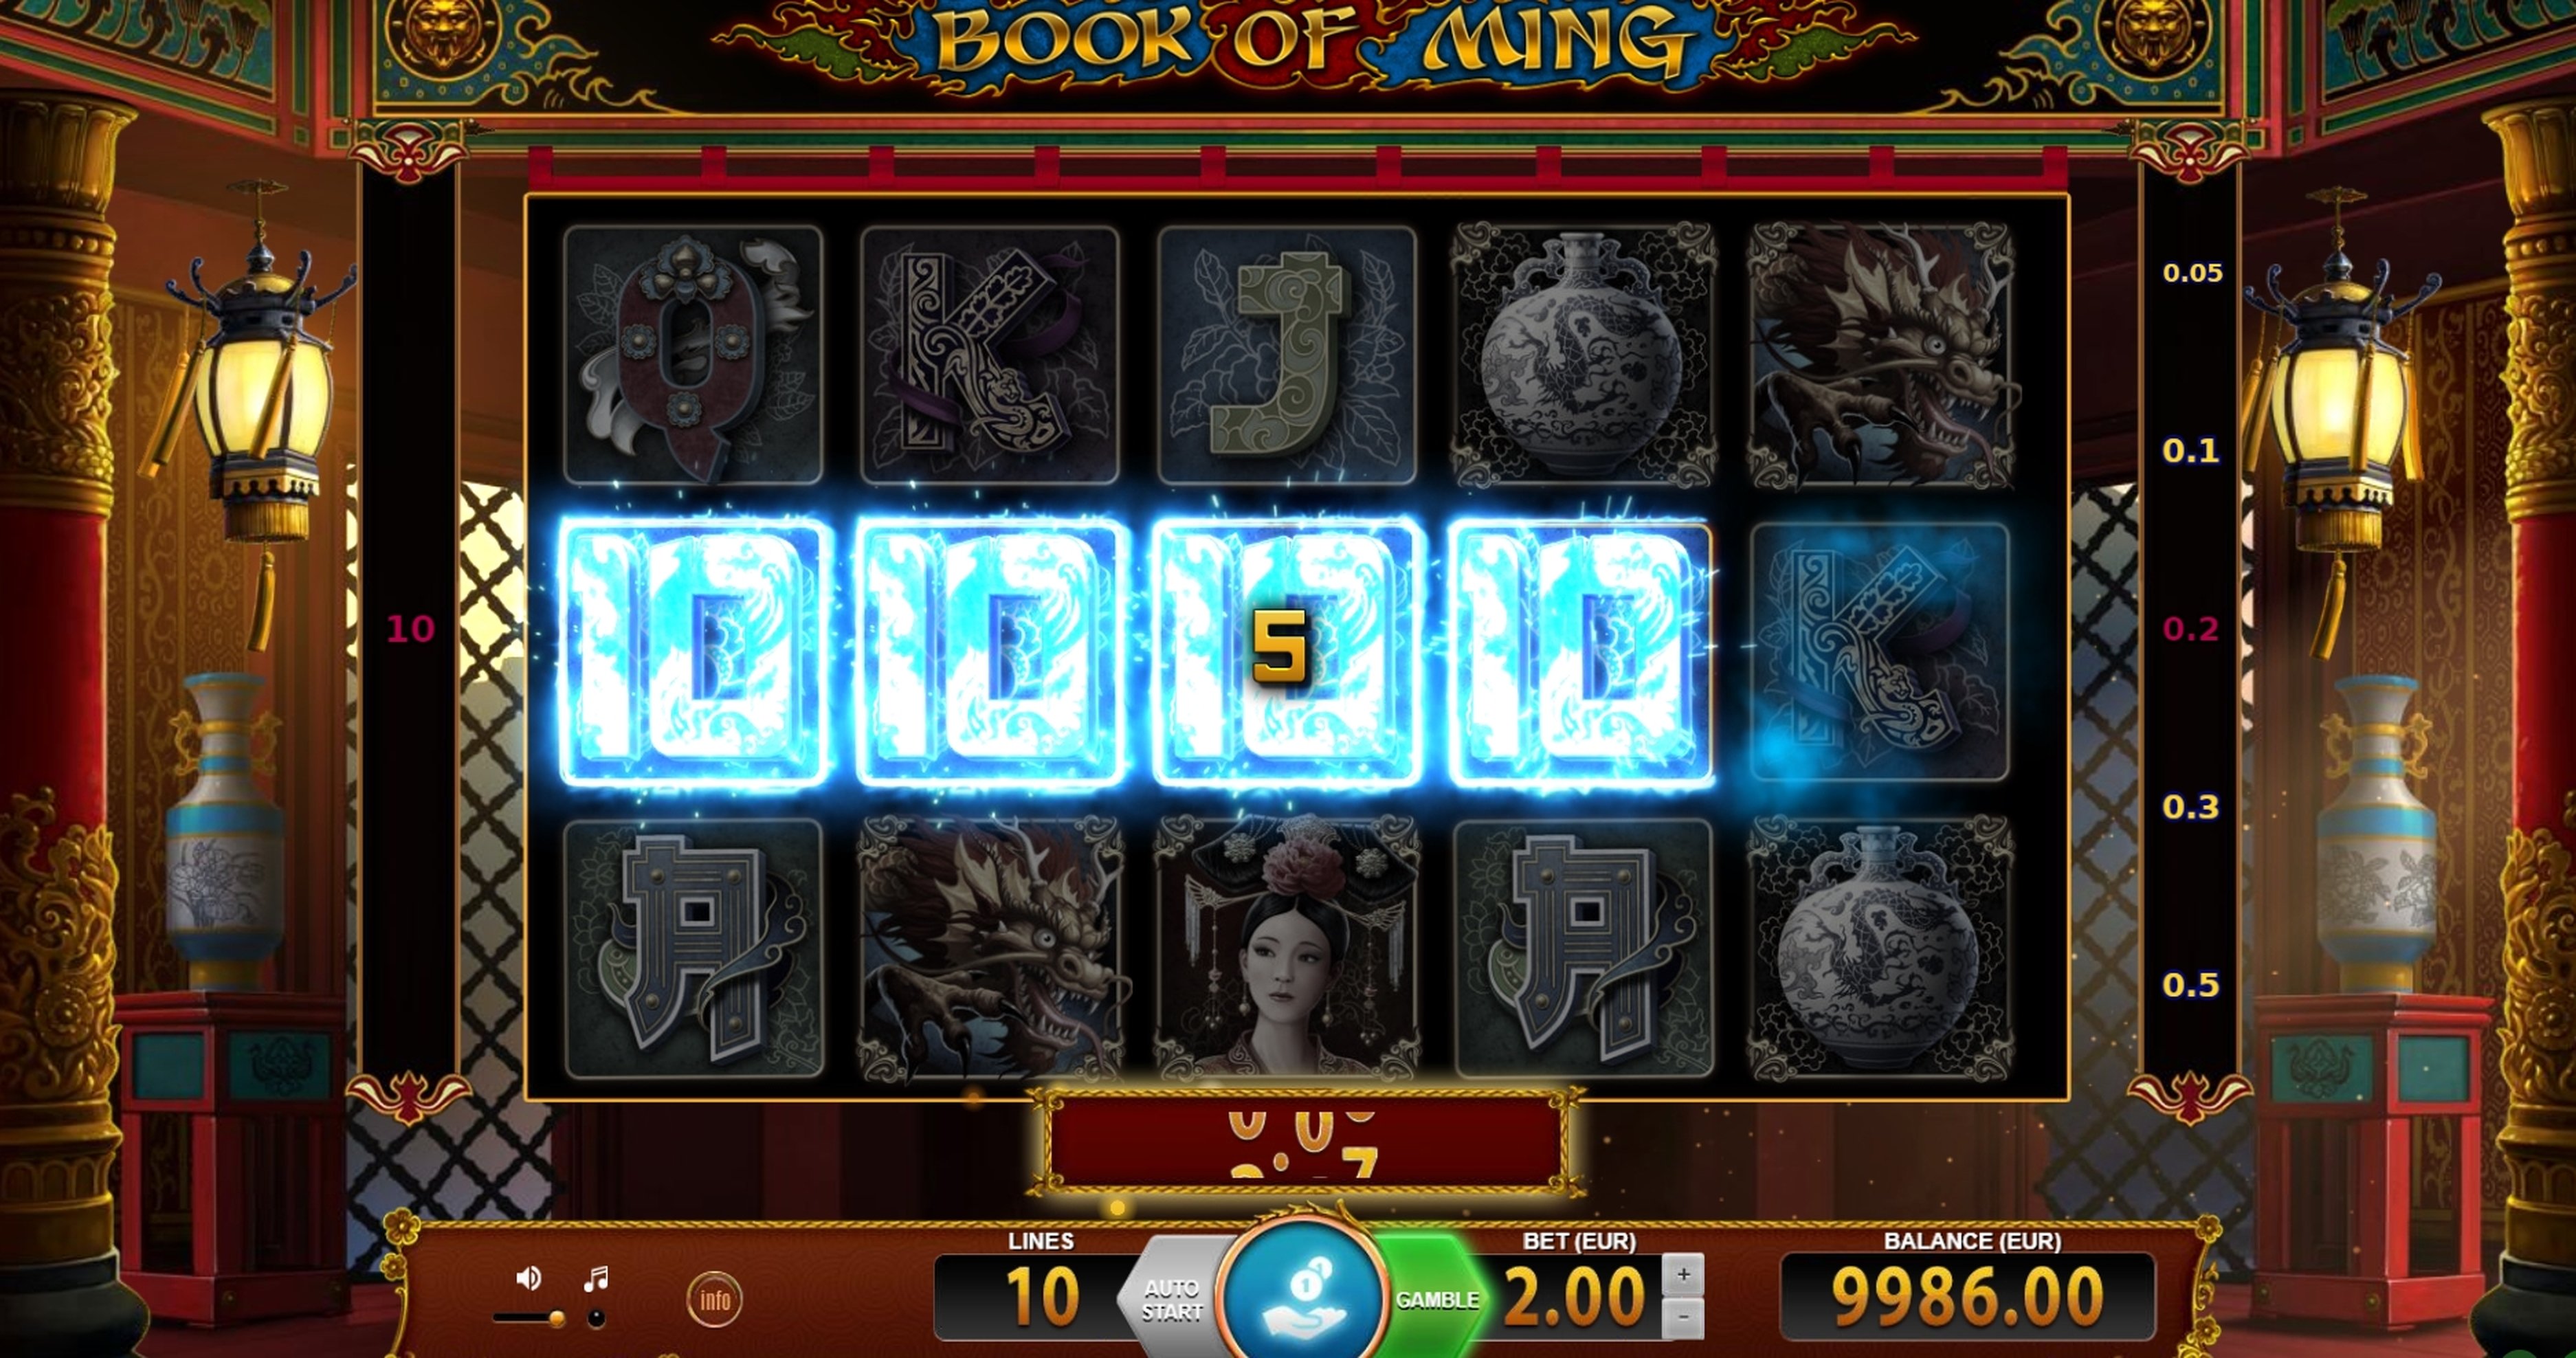 Win Money in Book of Ming Free Slot Game by BF Games